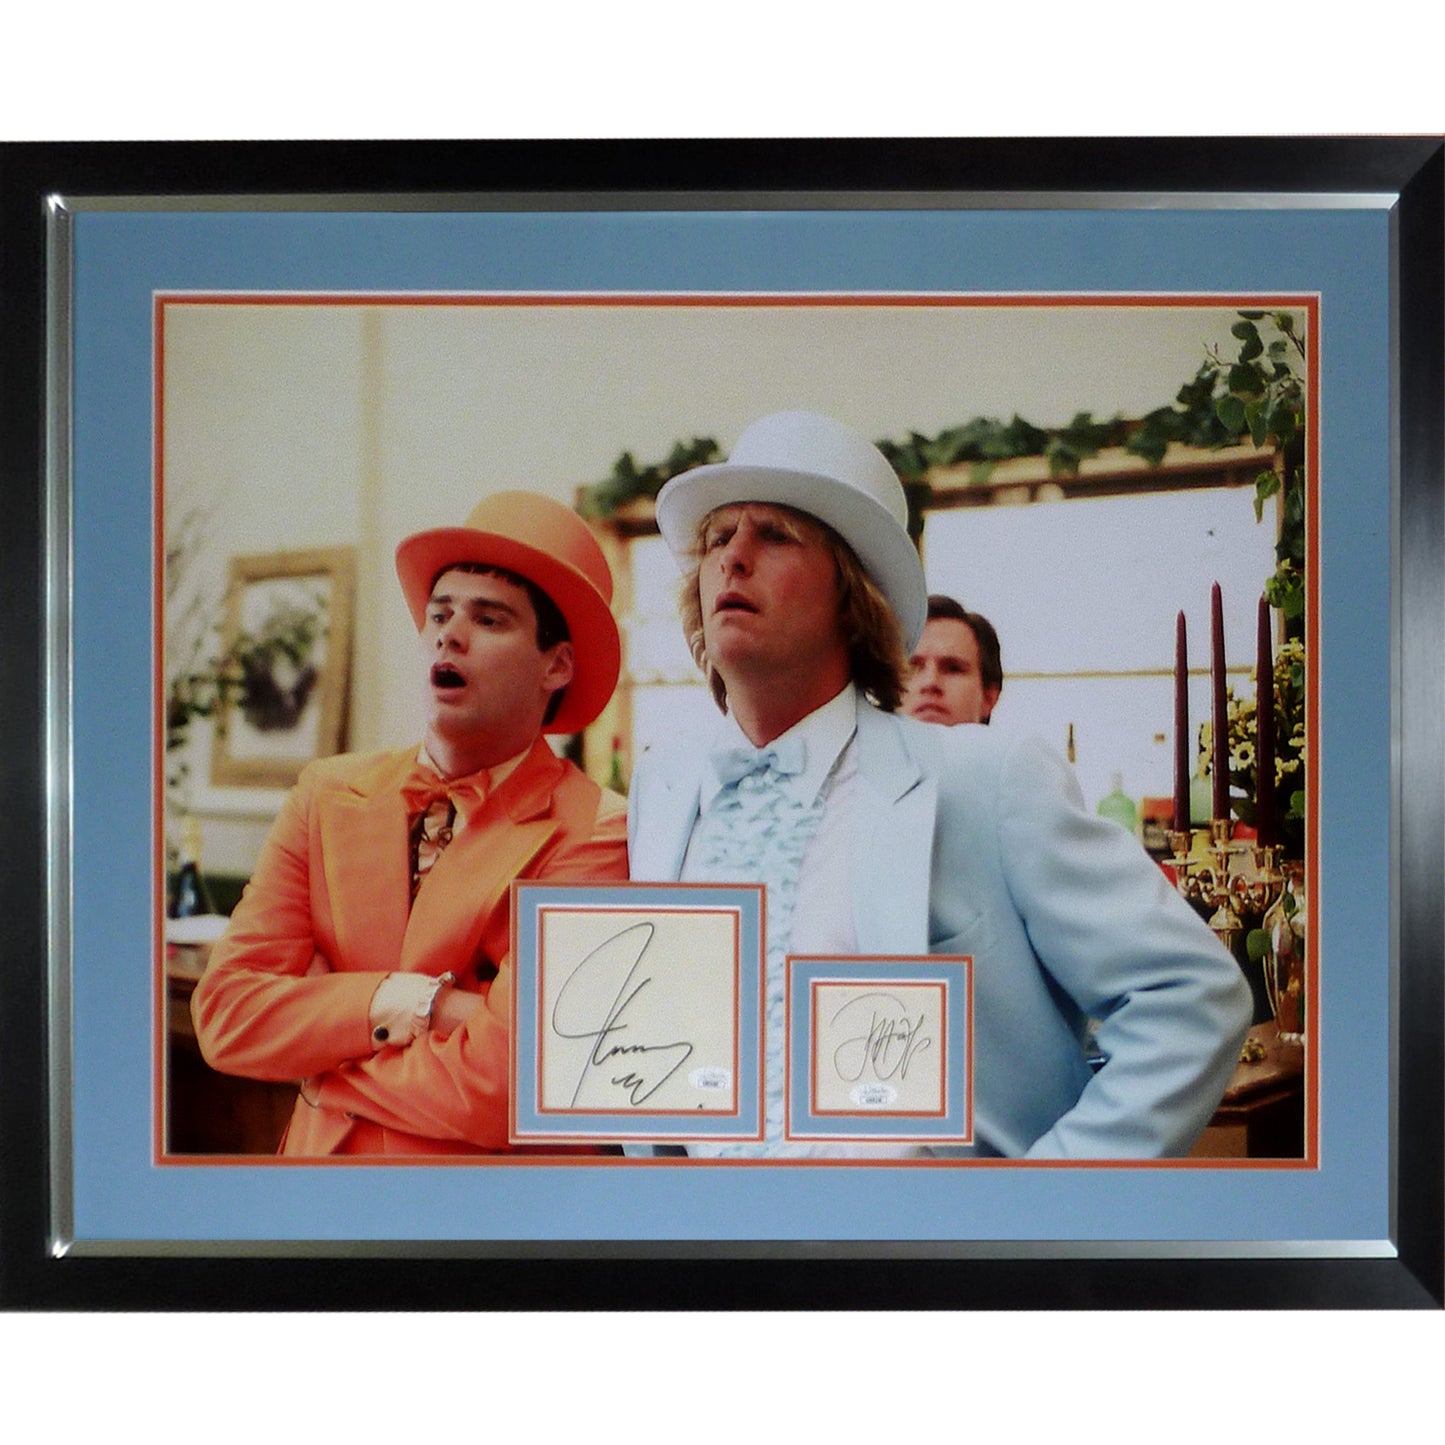 Dumb and Dumber Wedding Suits Full-Size Movie Poster Deluxe Framed with Jim Carrey And Jeff Daniels Autographs - JSA